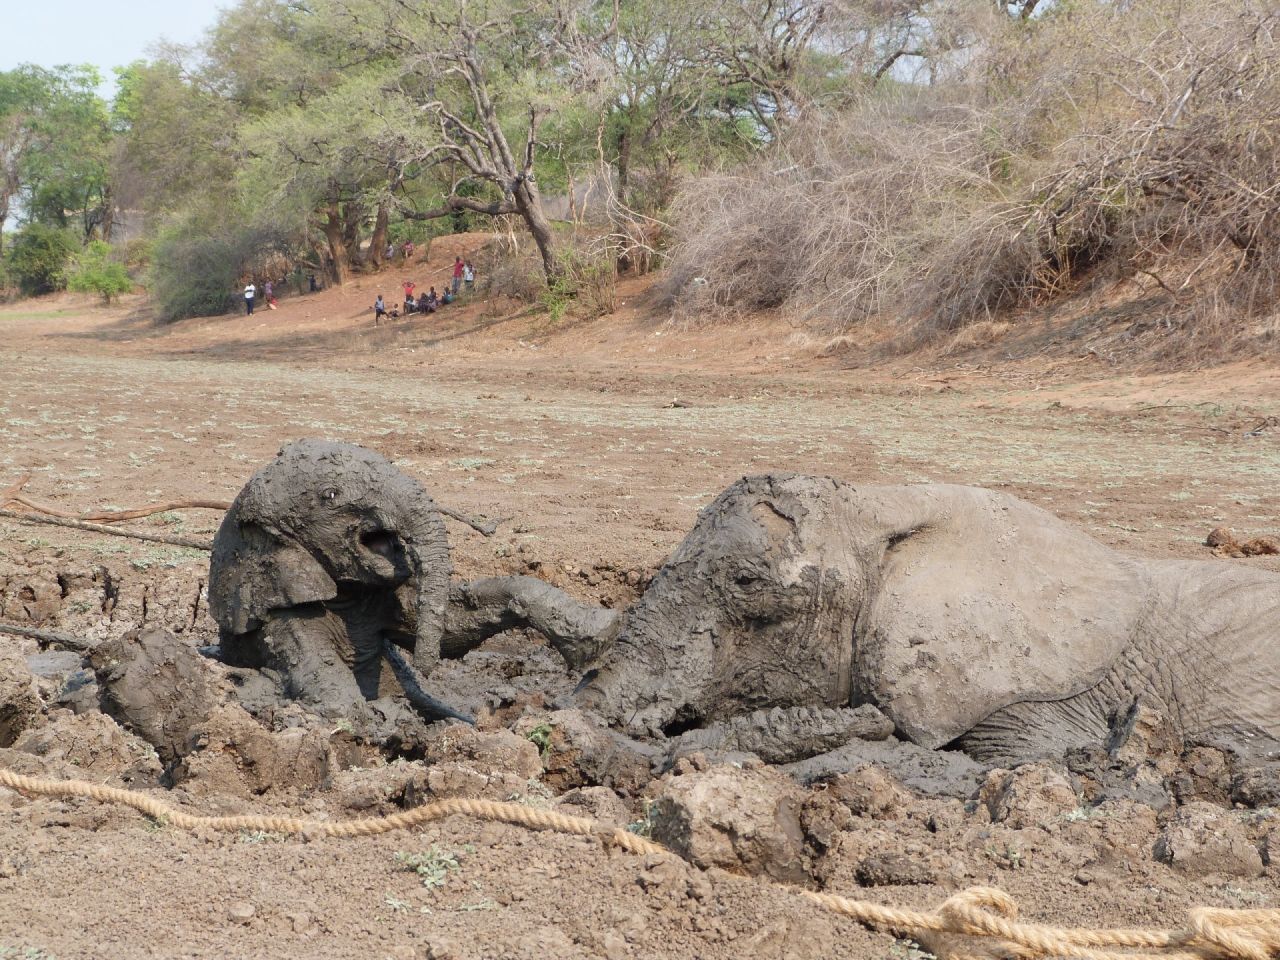 Staff from Kapani Safari Lodge used a rope in order to pull the baby elephant from the mud.